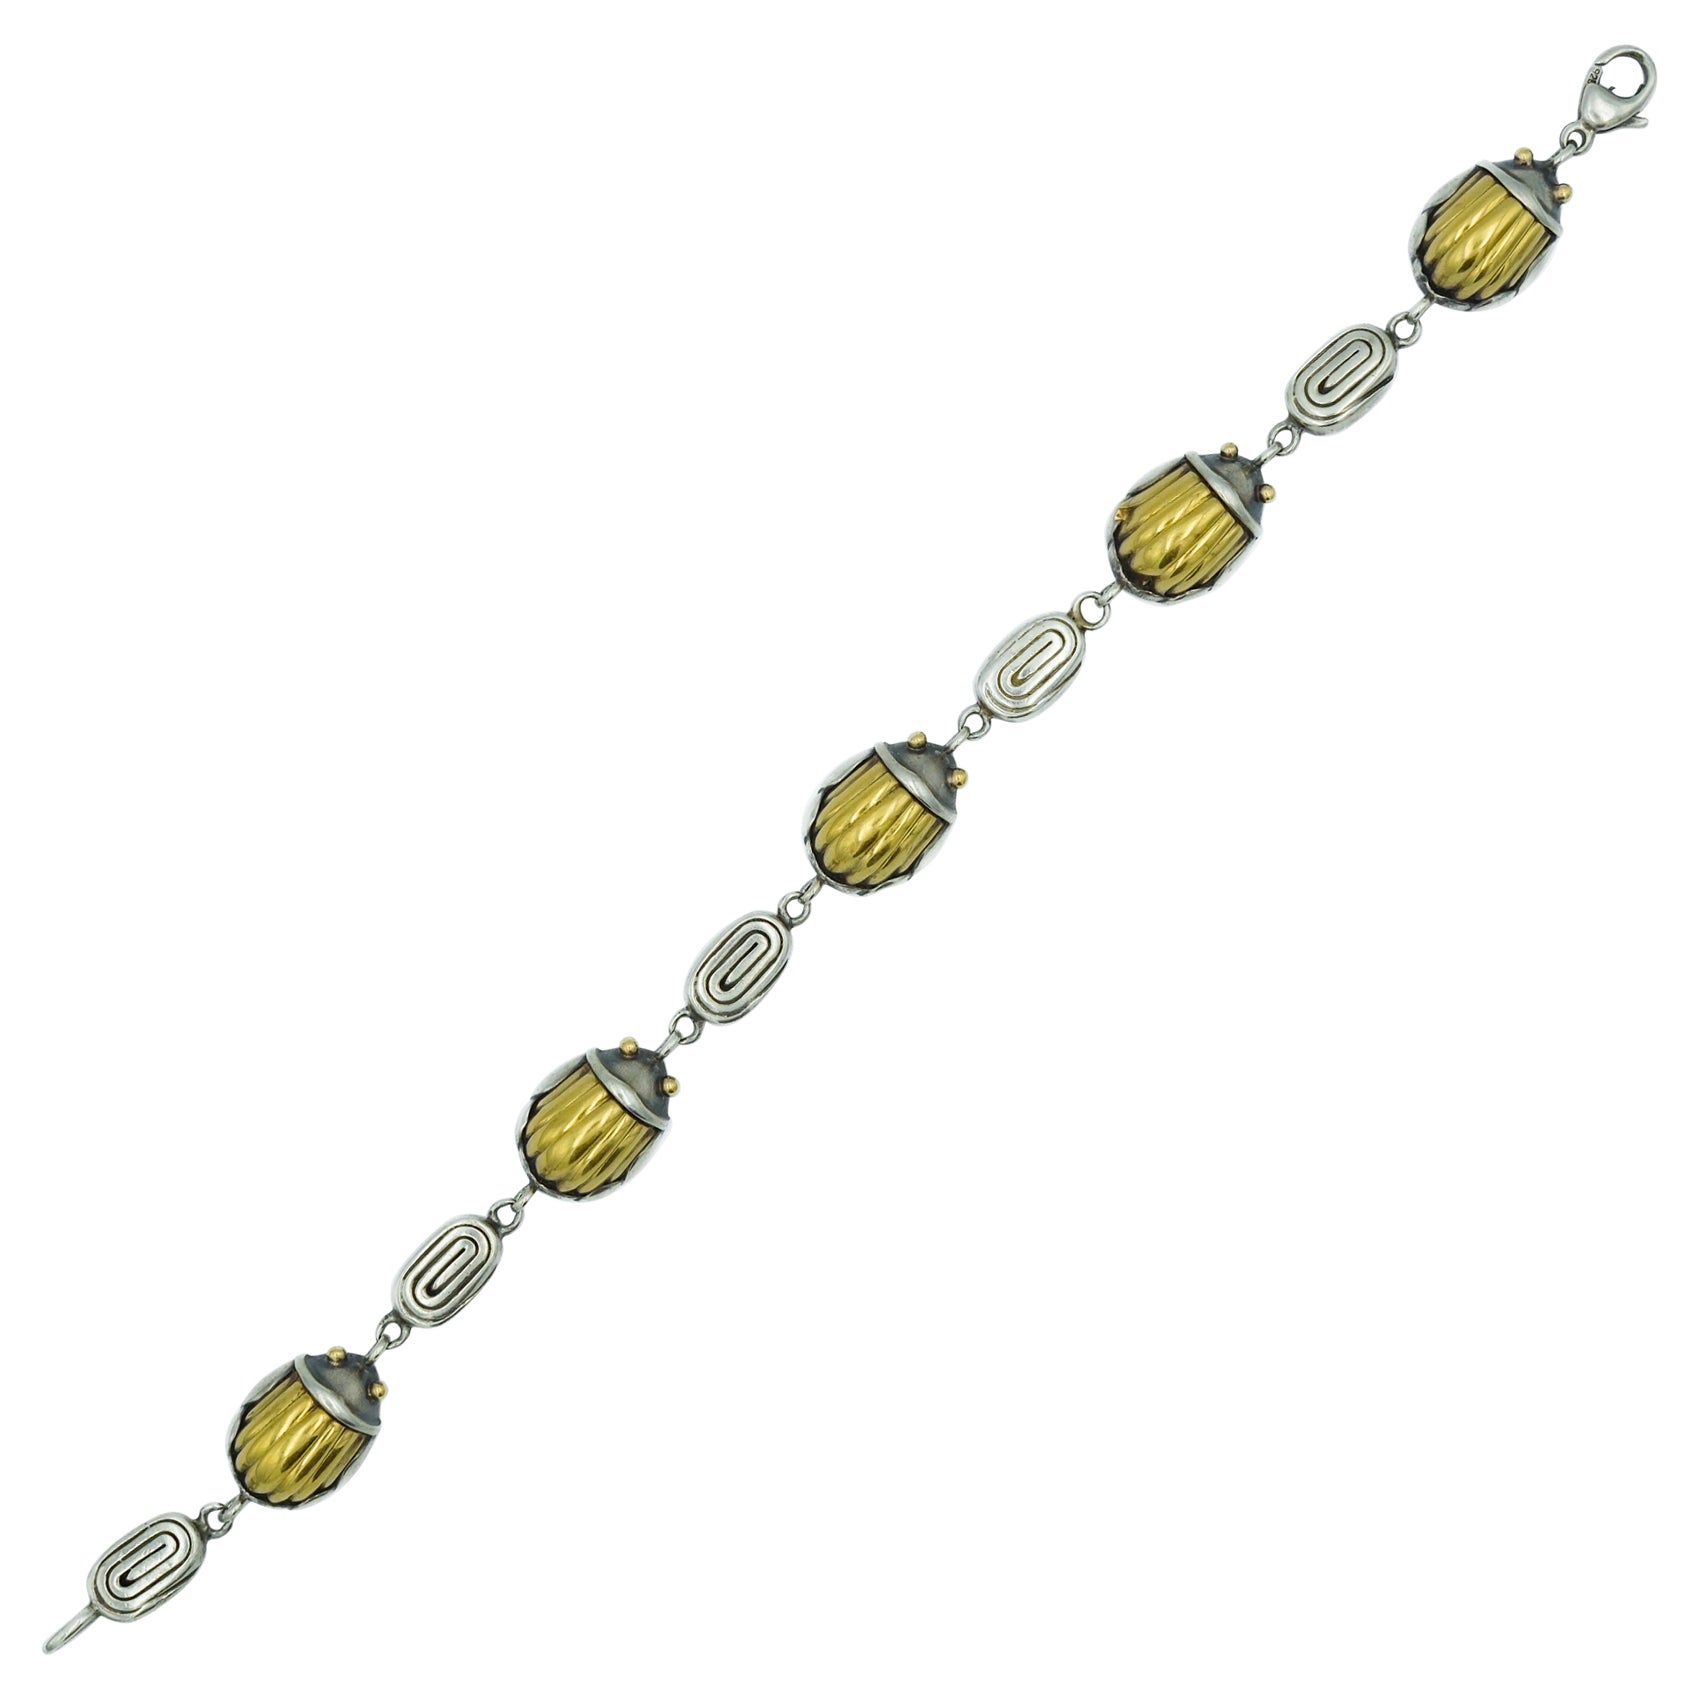 1993 Tiffany & Co. Scarab Link Bracelet in 18k Gold and 925 Sterling Silver